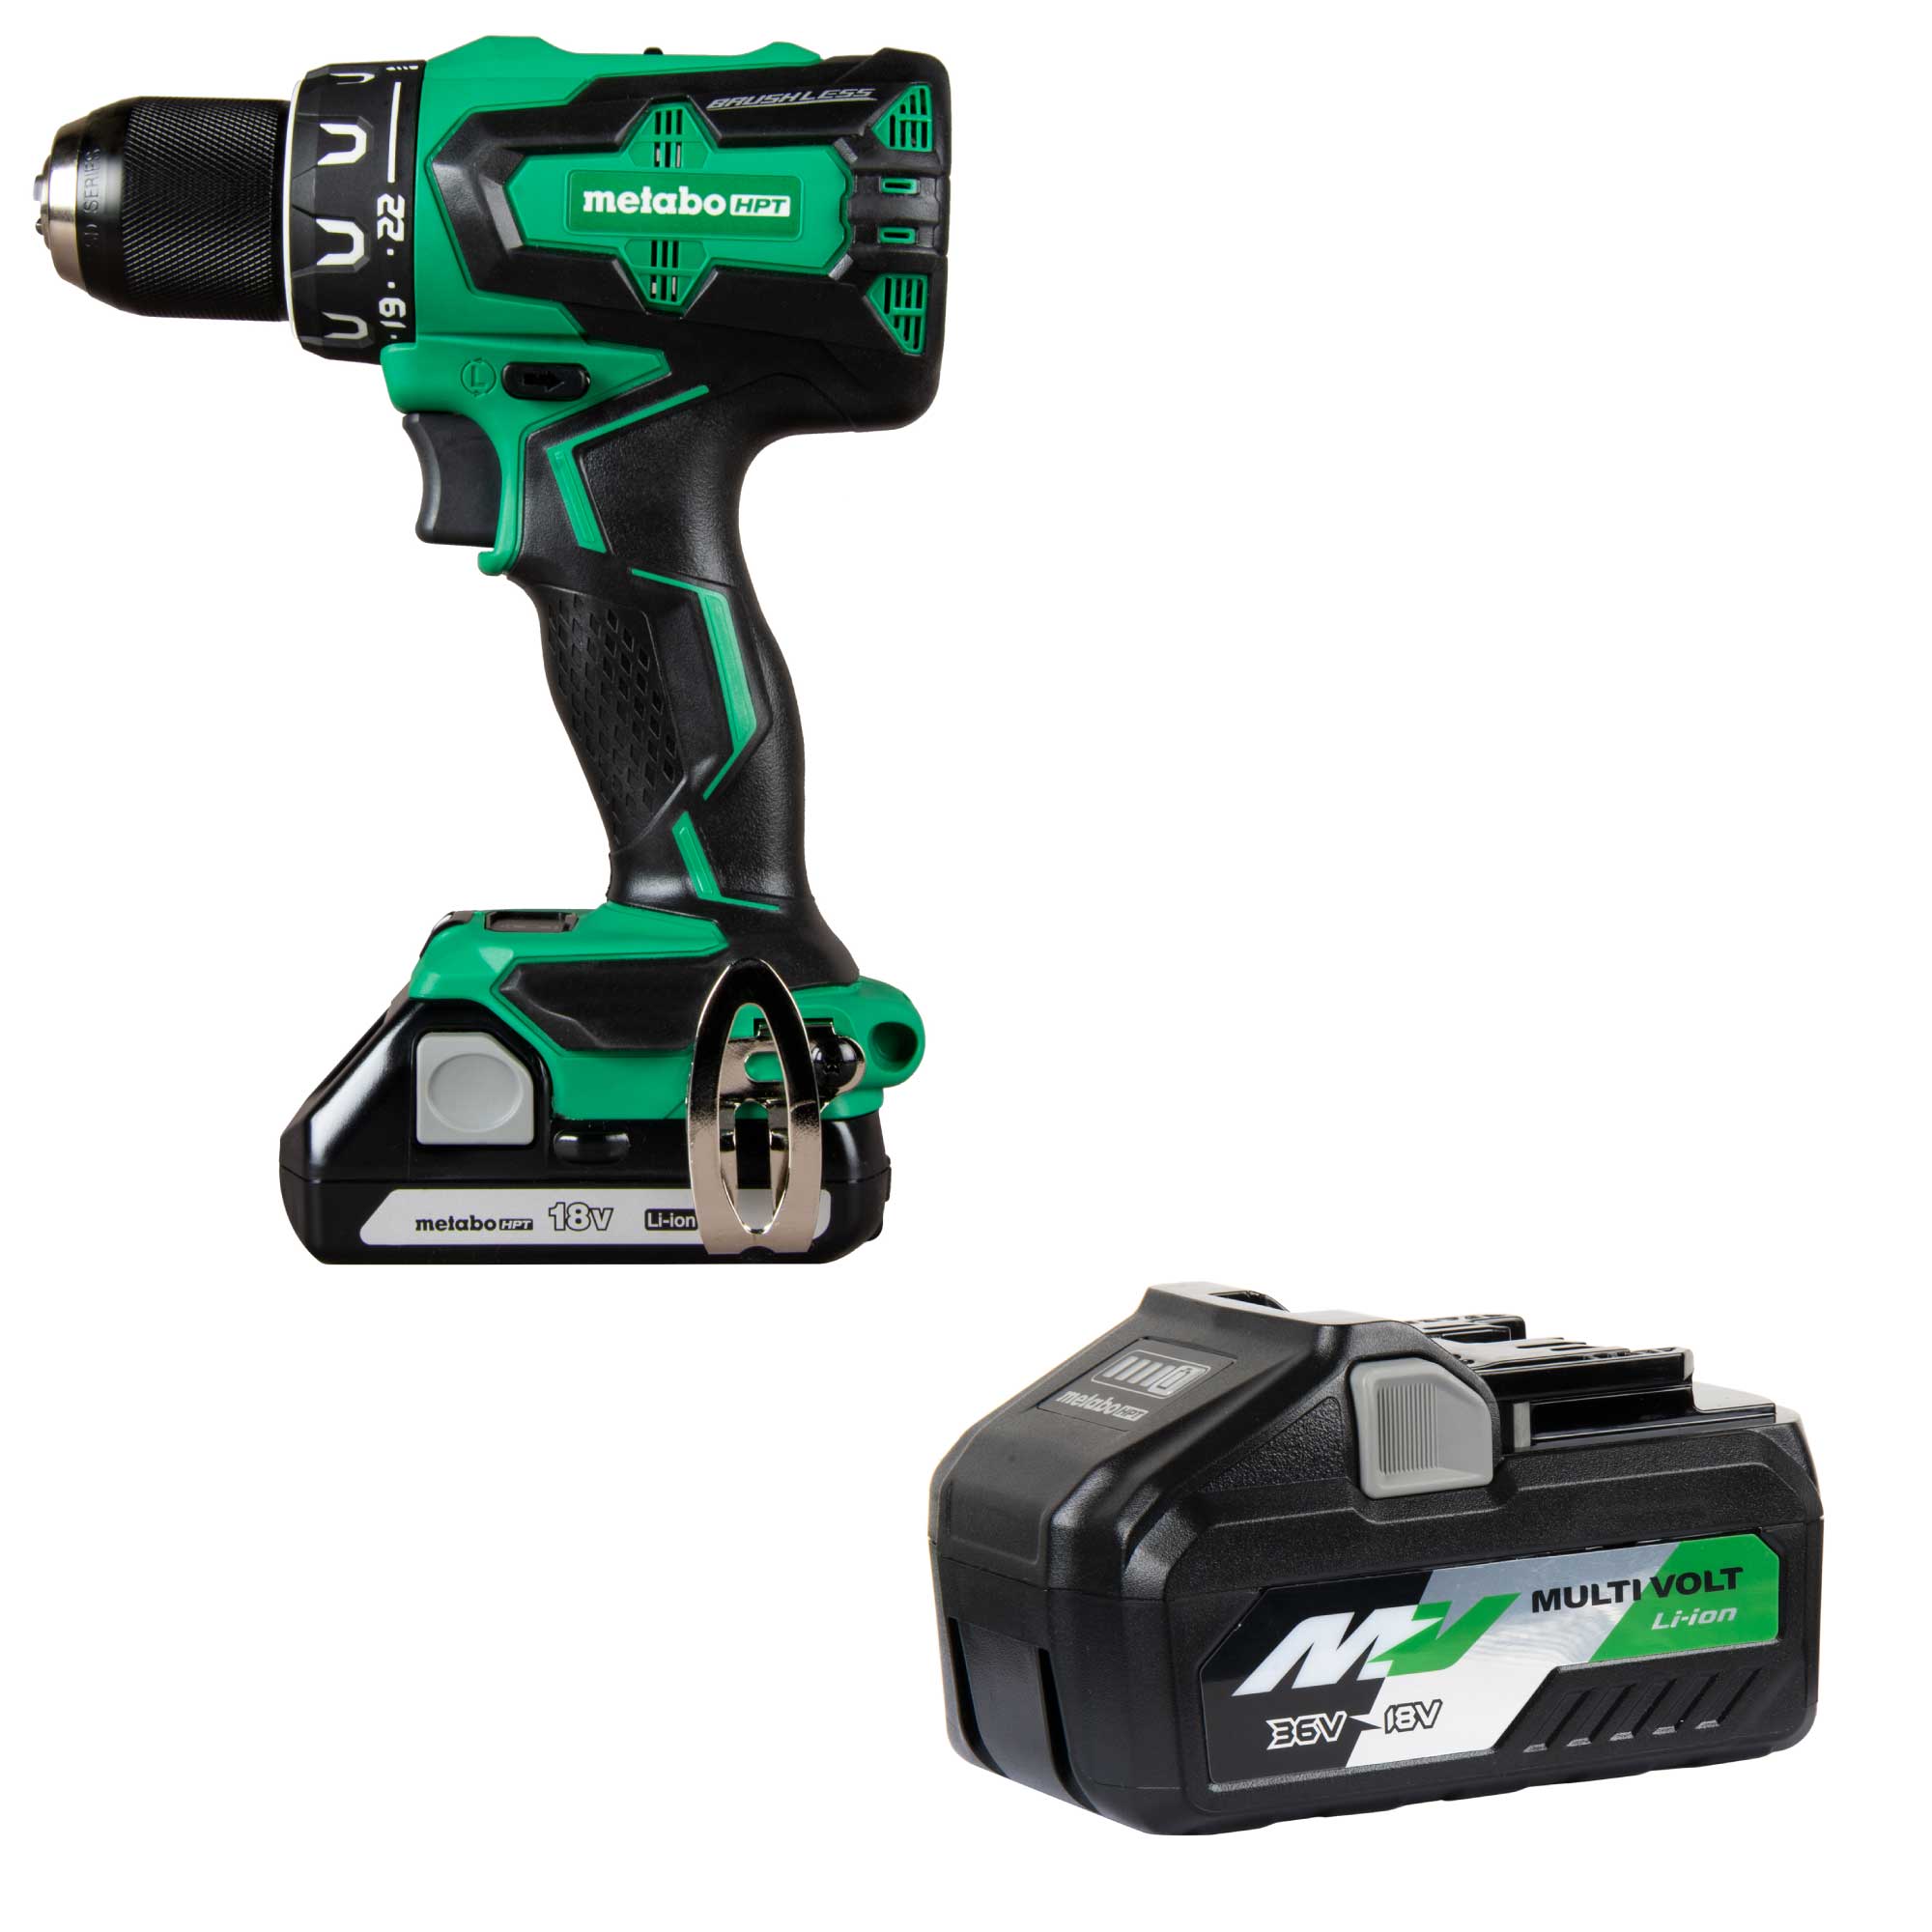 Metabo HPT MultiVolt 18-Volt 1/2-in Brushless Cordless Drill (2-batteries included and charger included) with MultiVolt 4.0Ah/8.0Ah Power Tool Battery